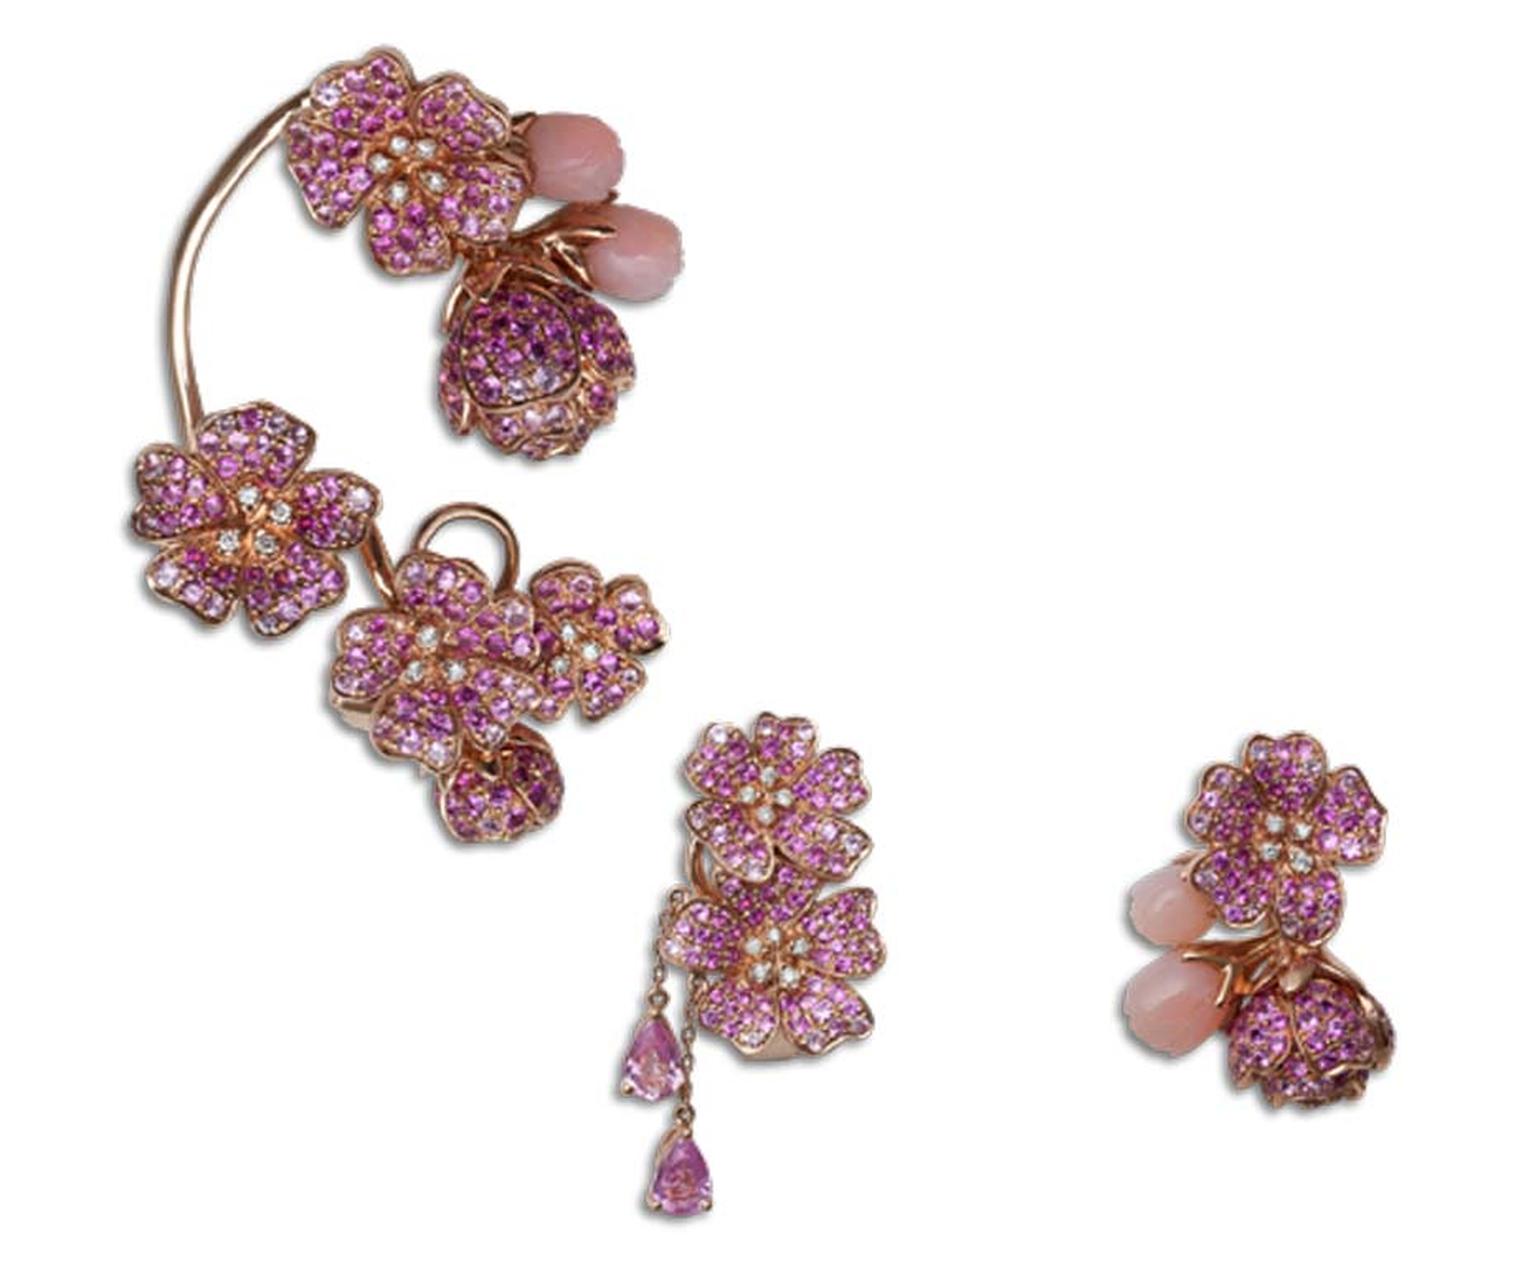 Morphée's Cherry Tree Blossom earrings are set with sapphires, diamonds and pink opals